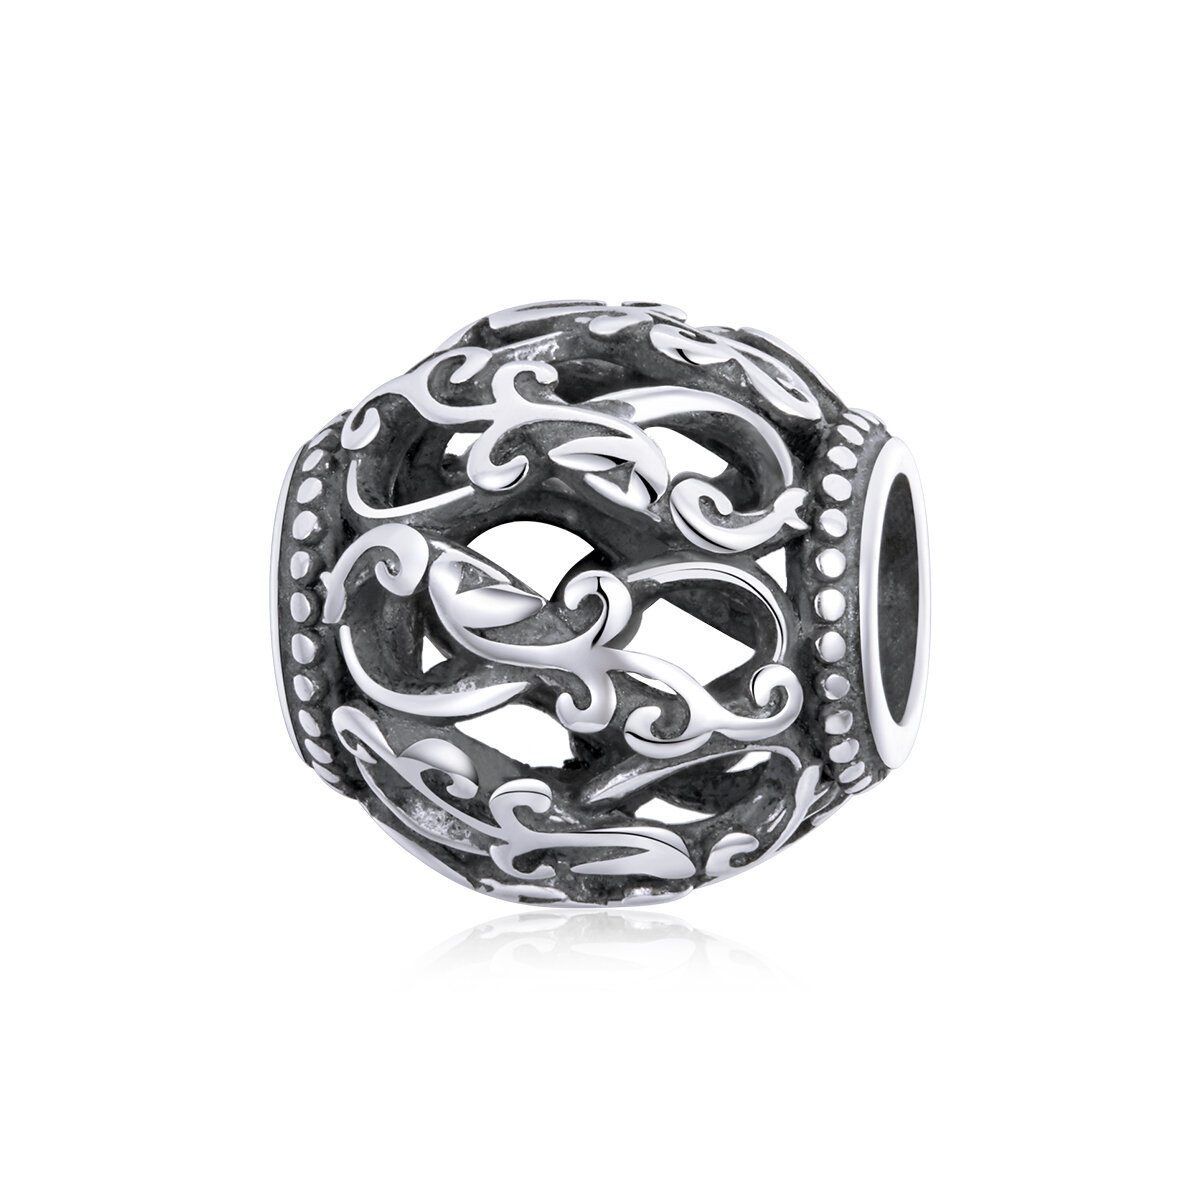 GemKing SCC1830 Energy bead S925 Sterling Silver Charm